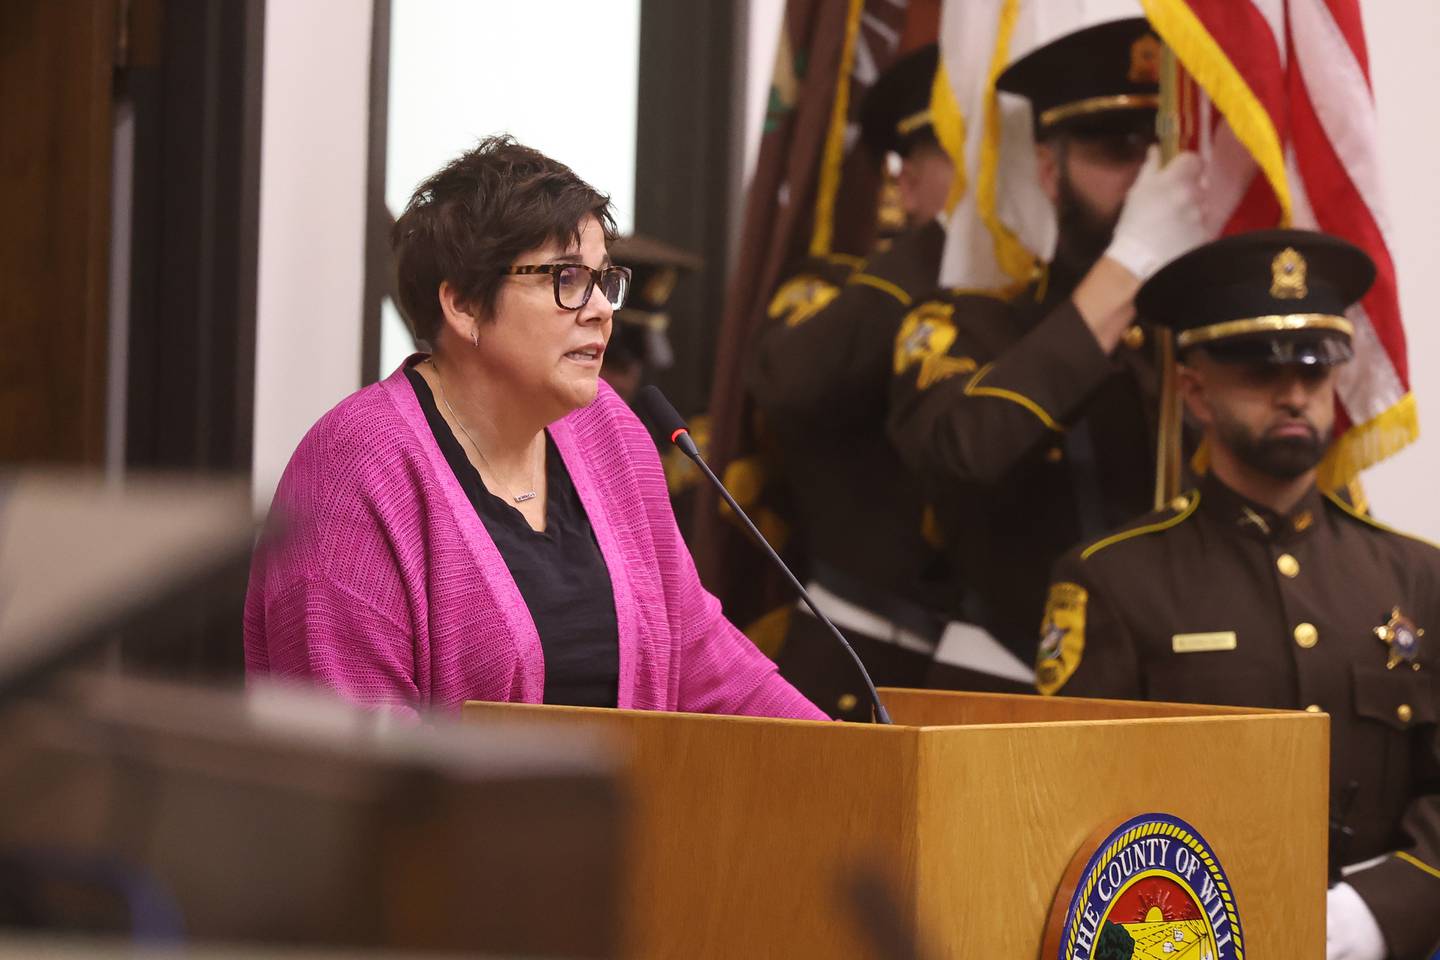 Will County Executive Jennifer Bertino-Tarrant shares a few words at the swearing-in ceremony for several elected county officials at the Will County Building in Joliet on Thursday.